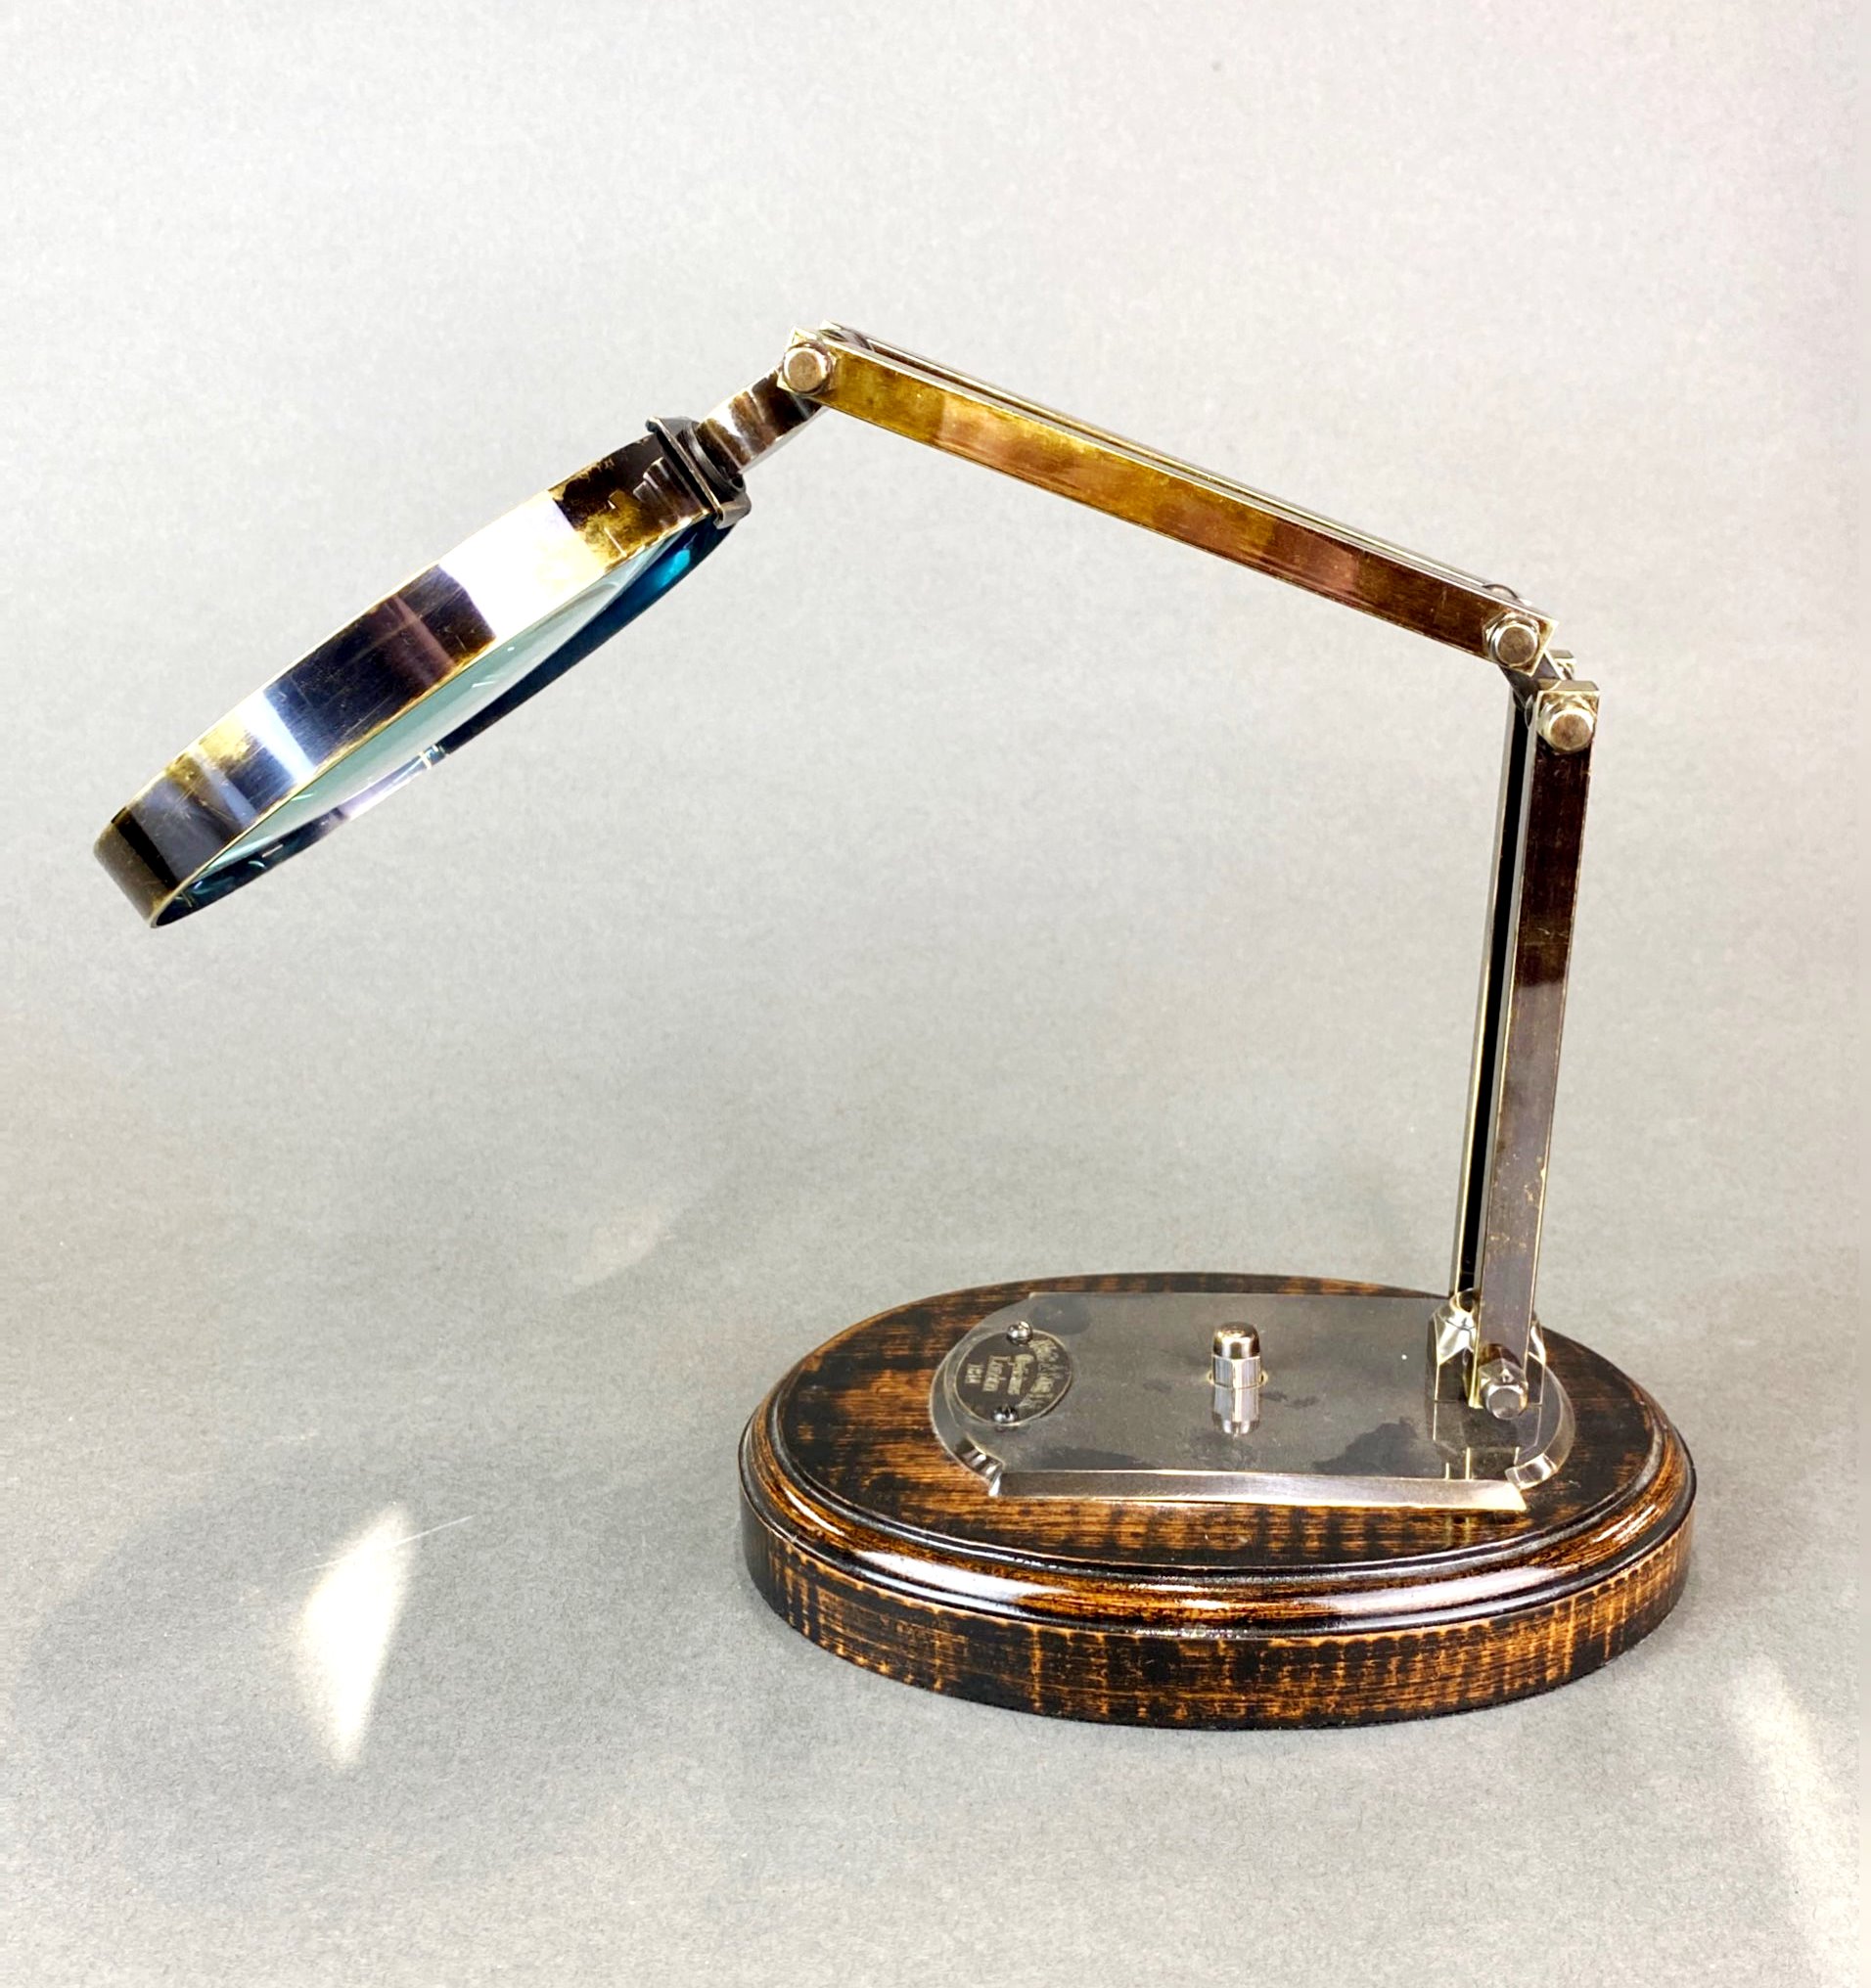 A desk magnifying glass.